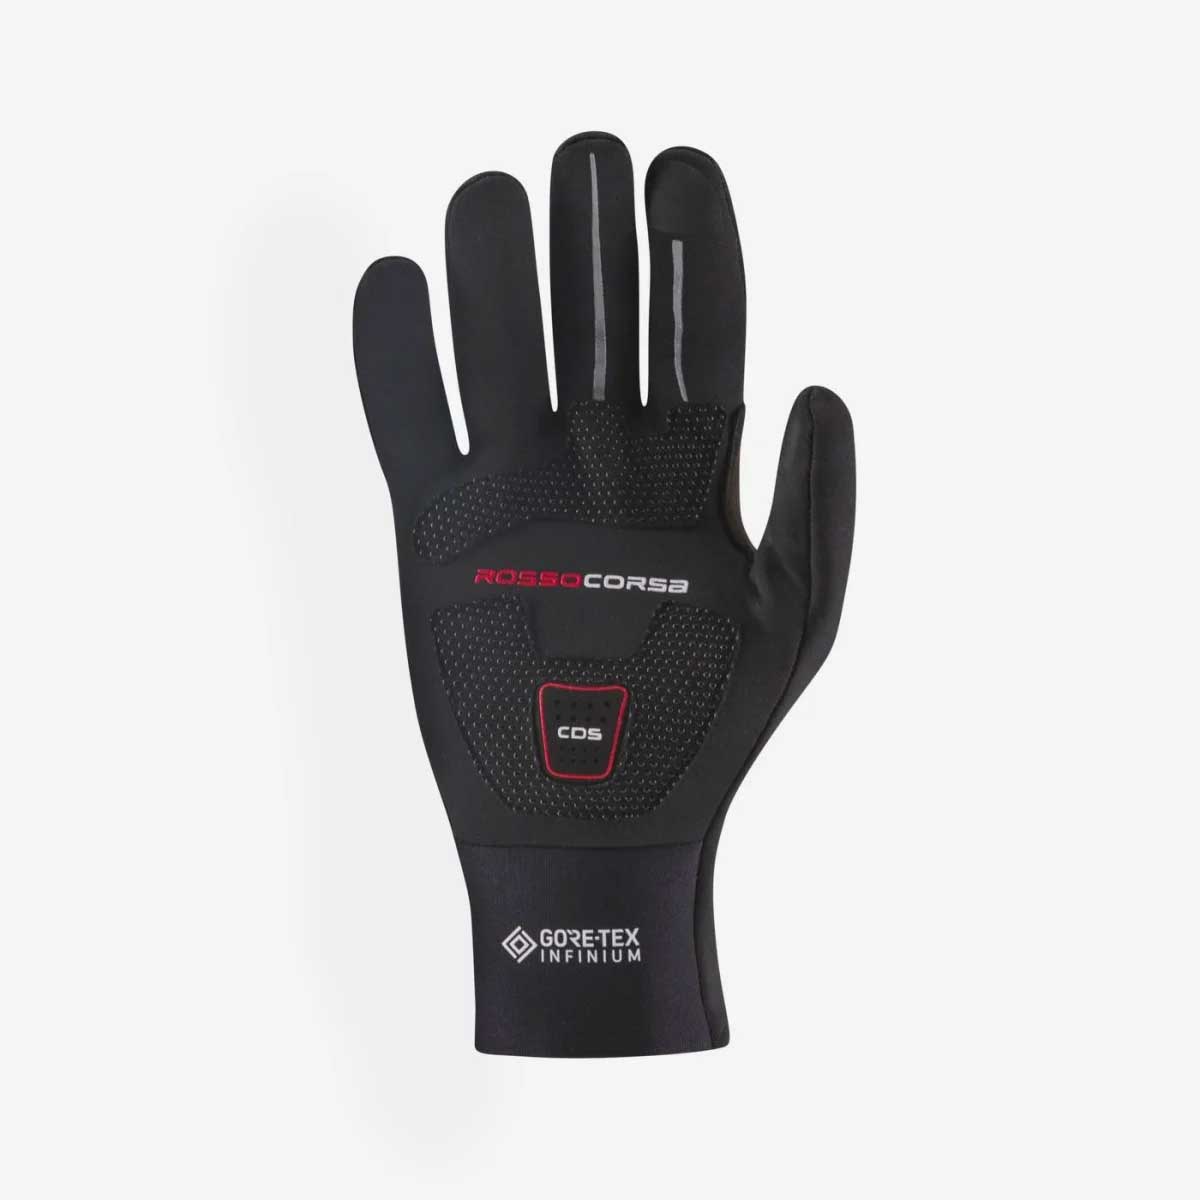 Castelli Perfetto RoS Cycling Glove